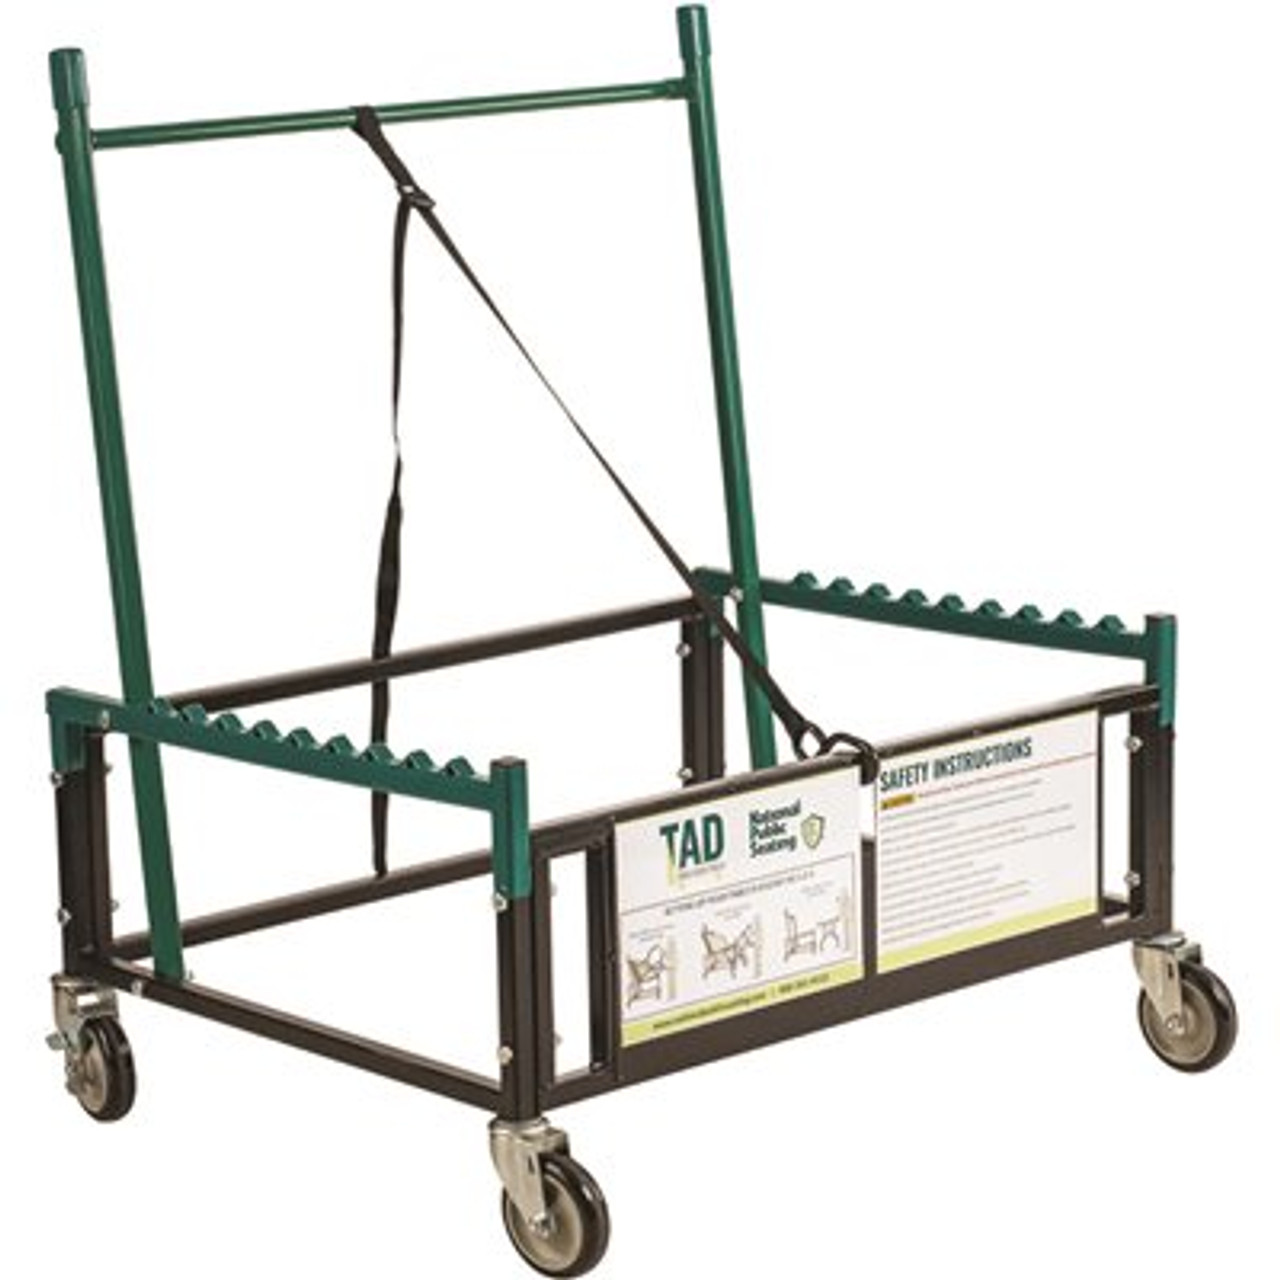 National Public Seating 1,000 lbs. Steel Table Assist Dolly for Storage and Transport in Black